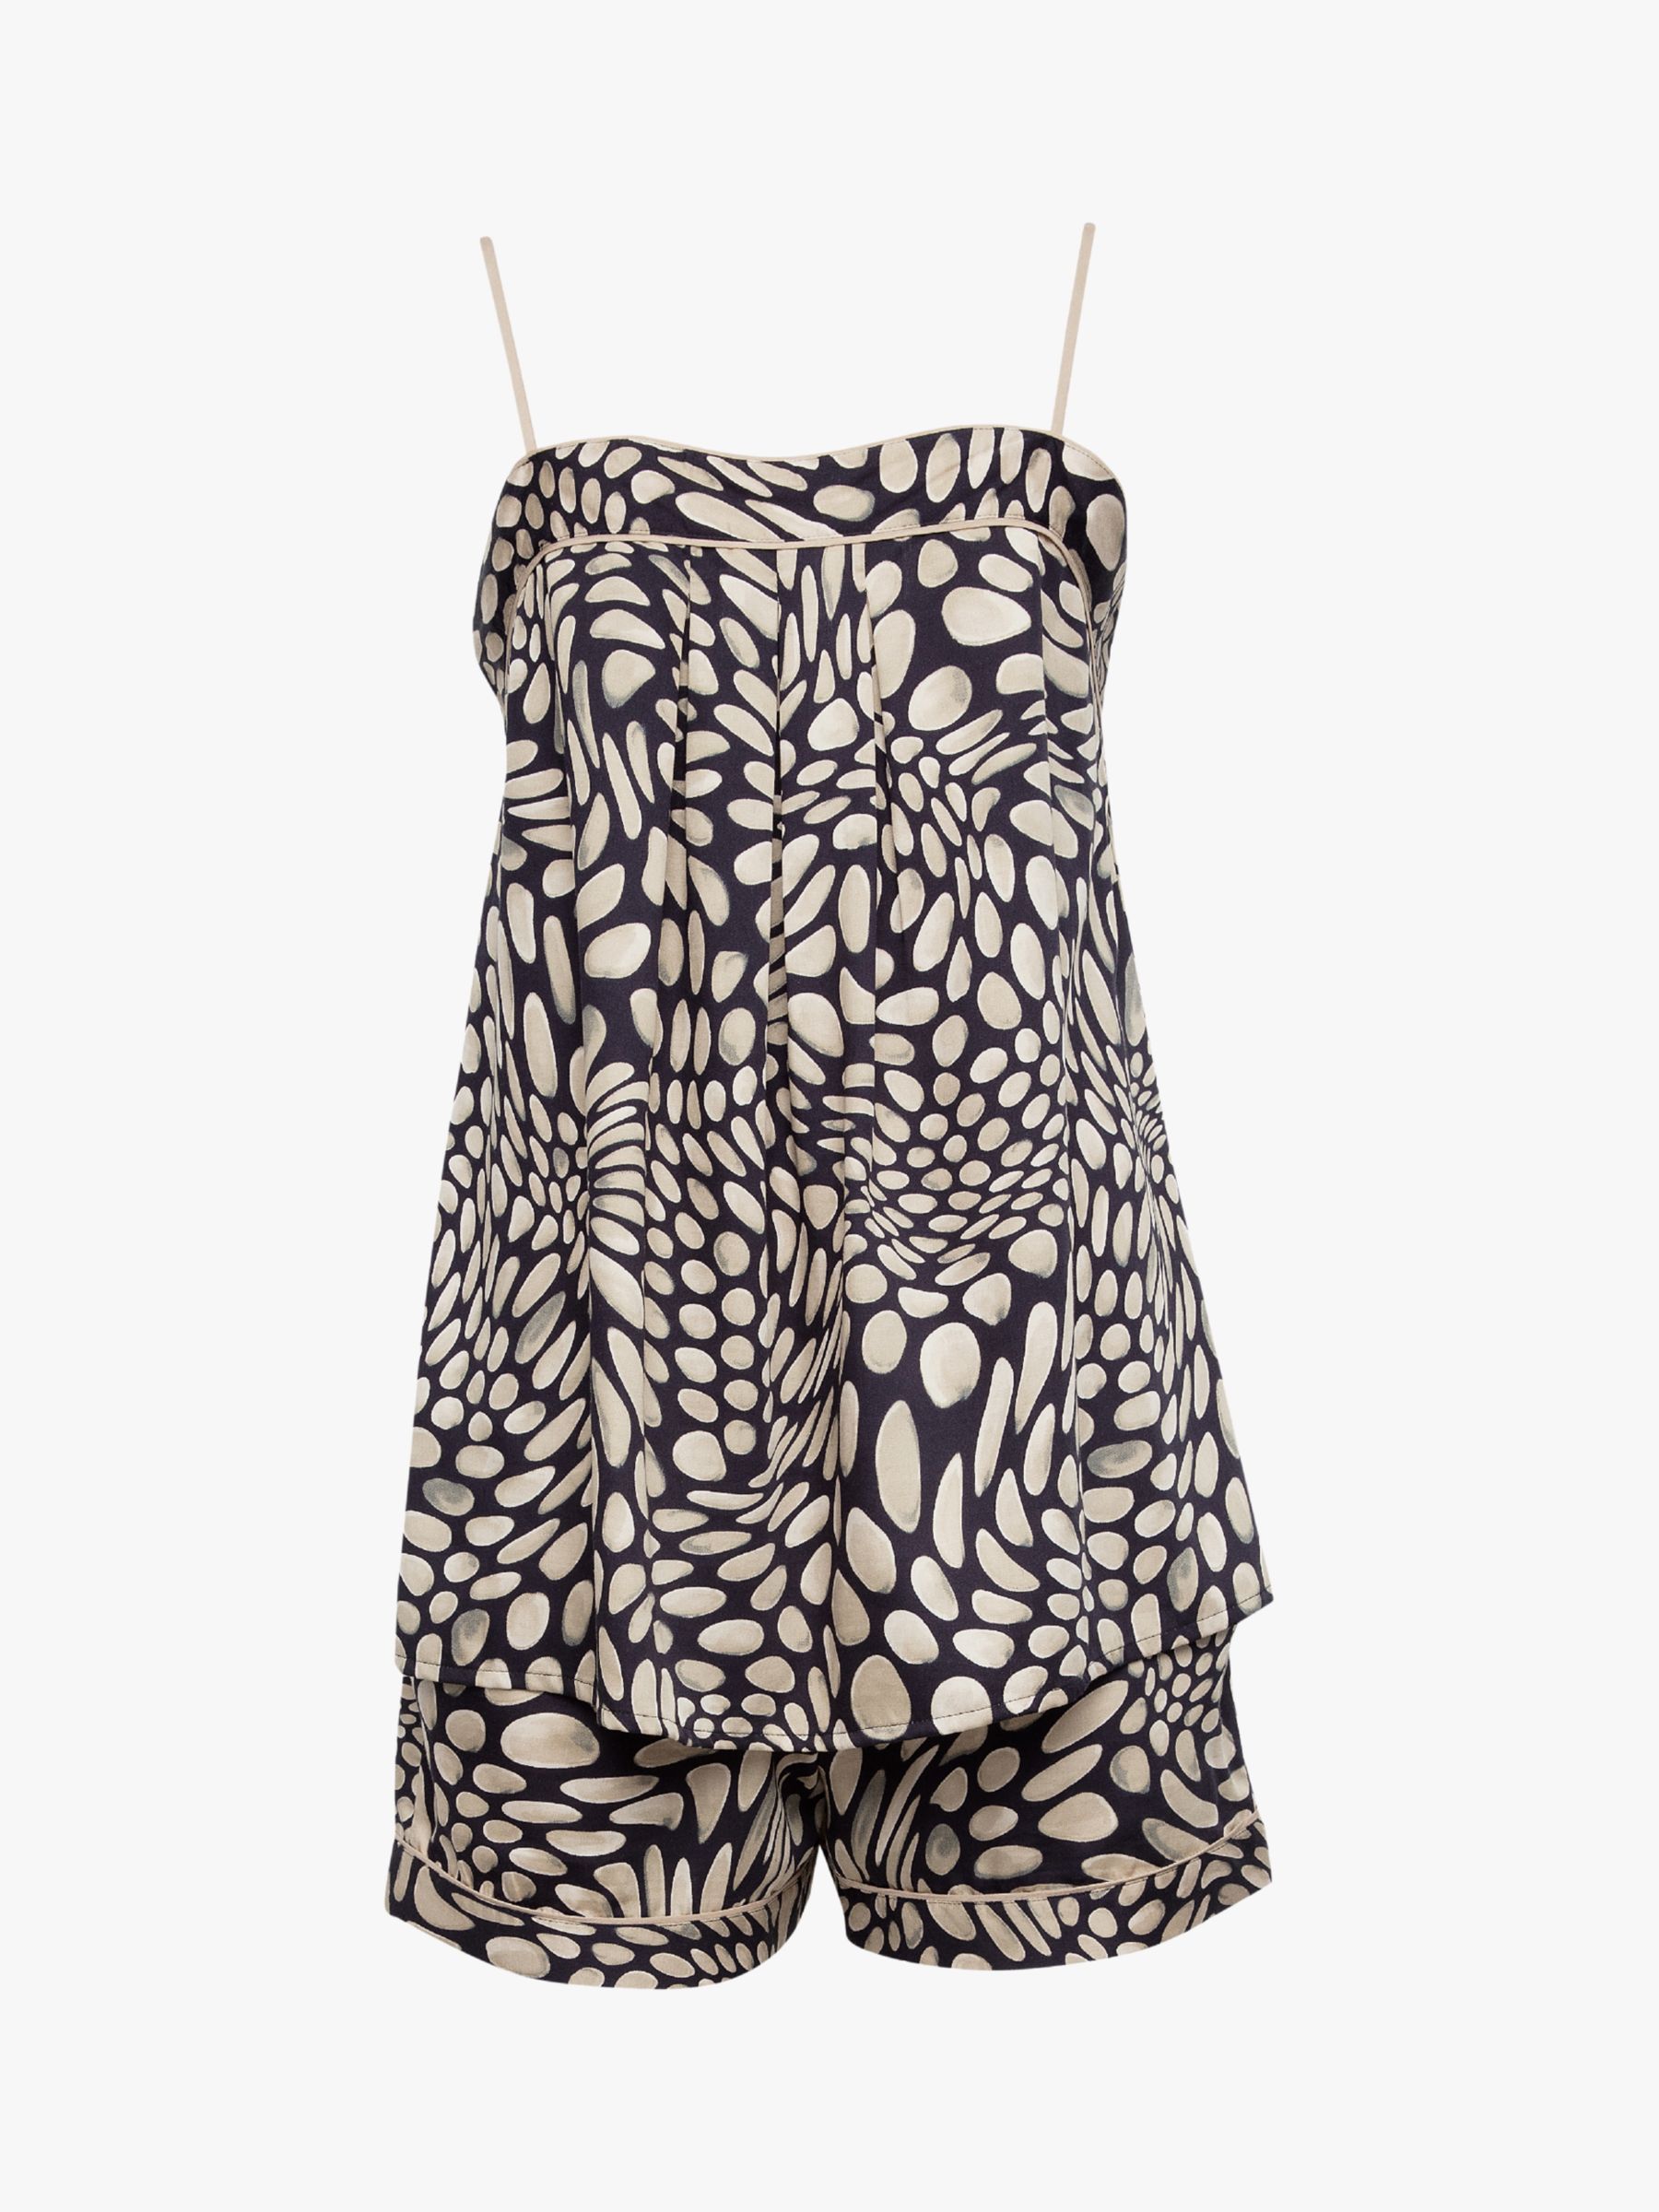 Buy Fable & Eve Carnaby Pebble Print Cami and Shorts Pyjamas, Black/Beige Online at johnlewis.com